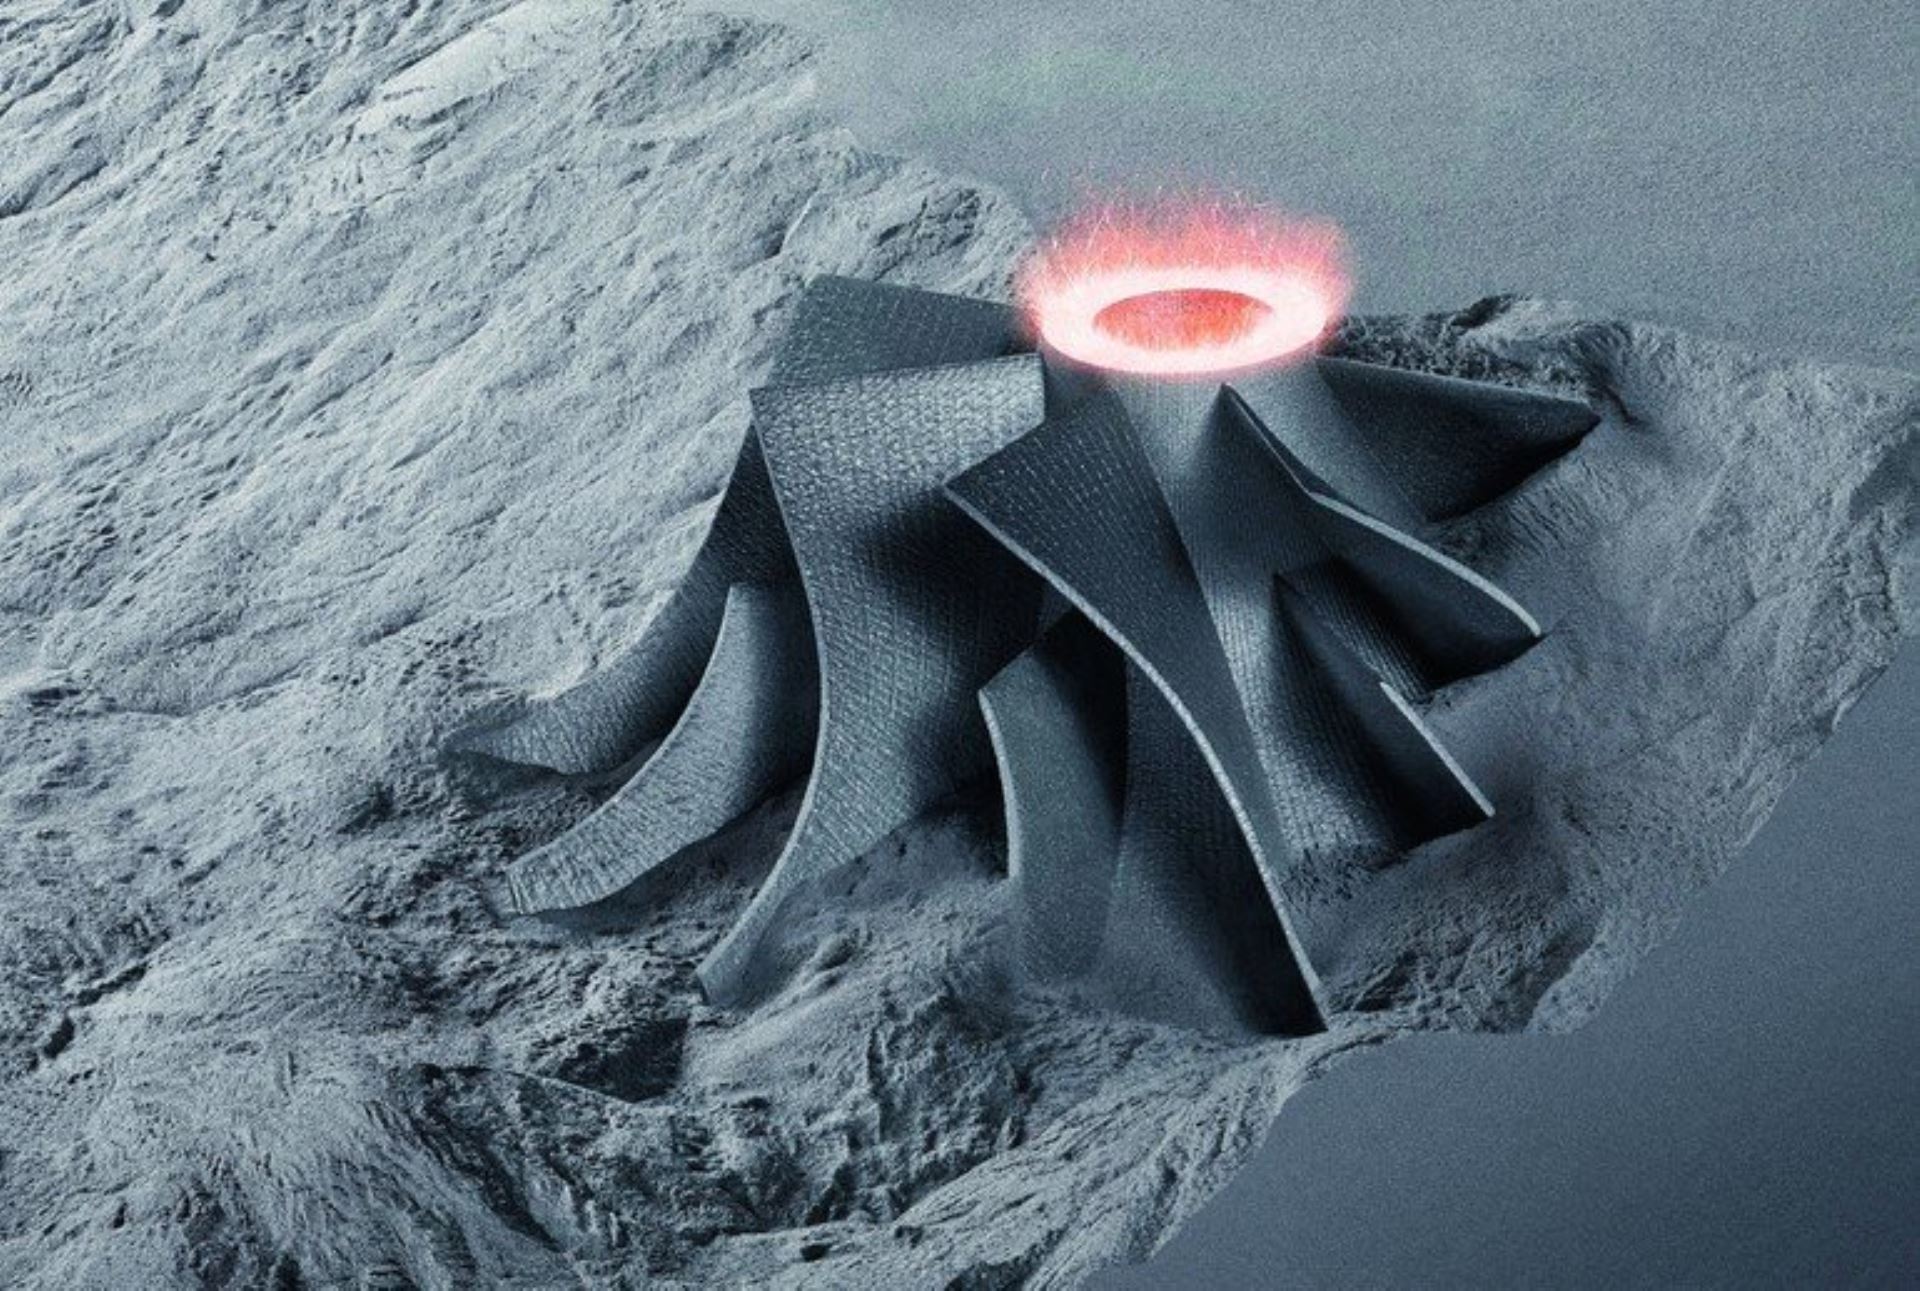 ADDITIVE MANUFACTURING TECHNOLOGIES